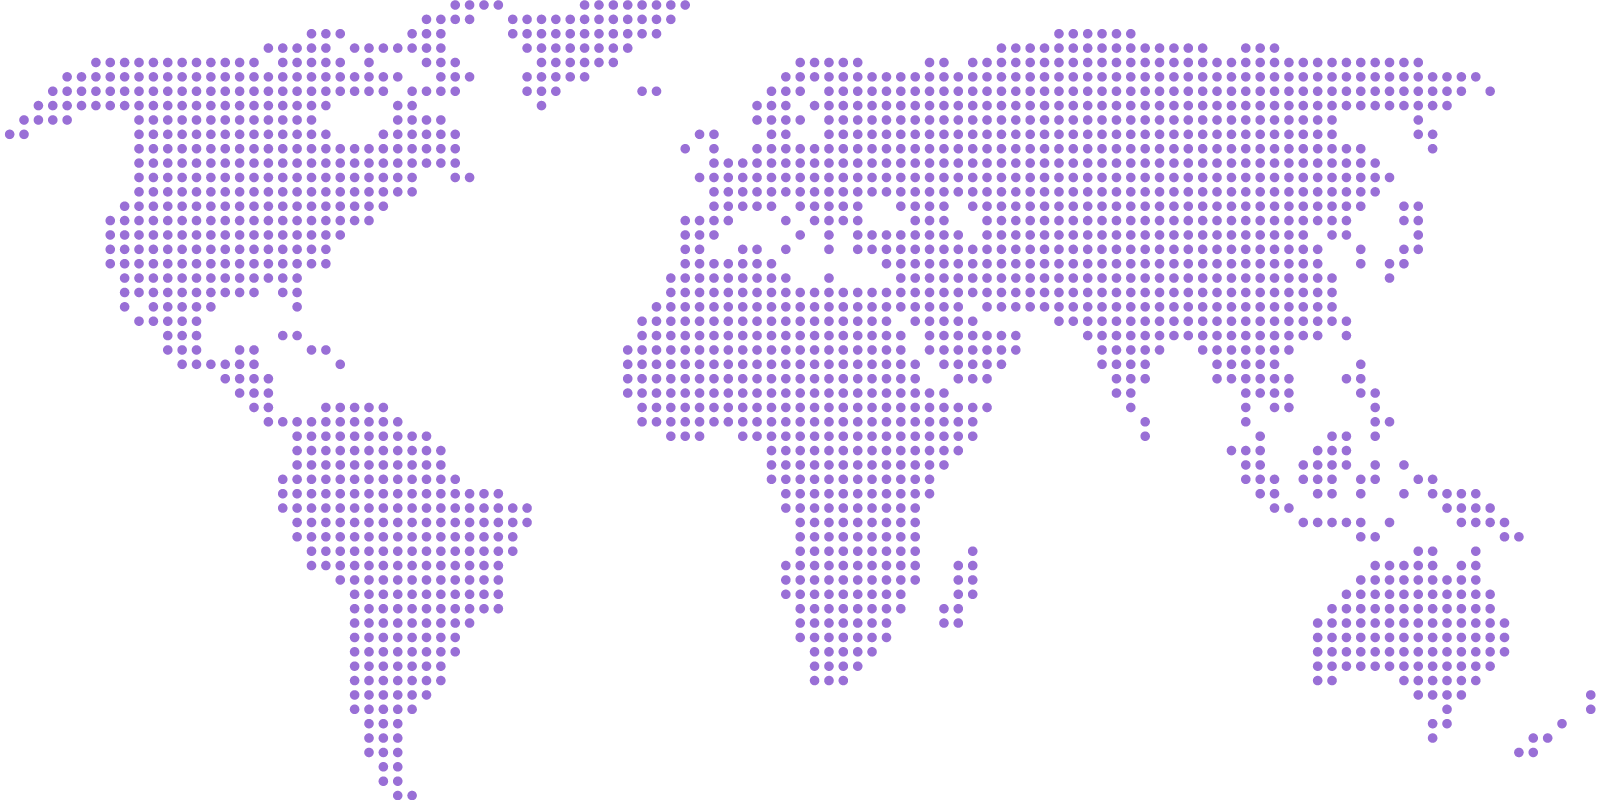 world map graphic made out of light purple dots